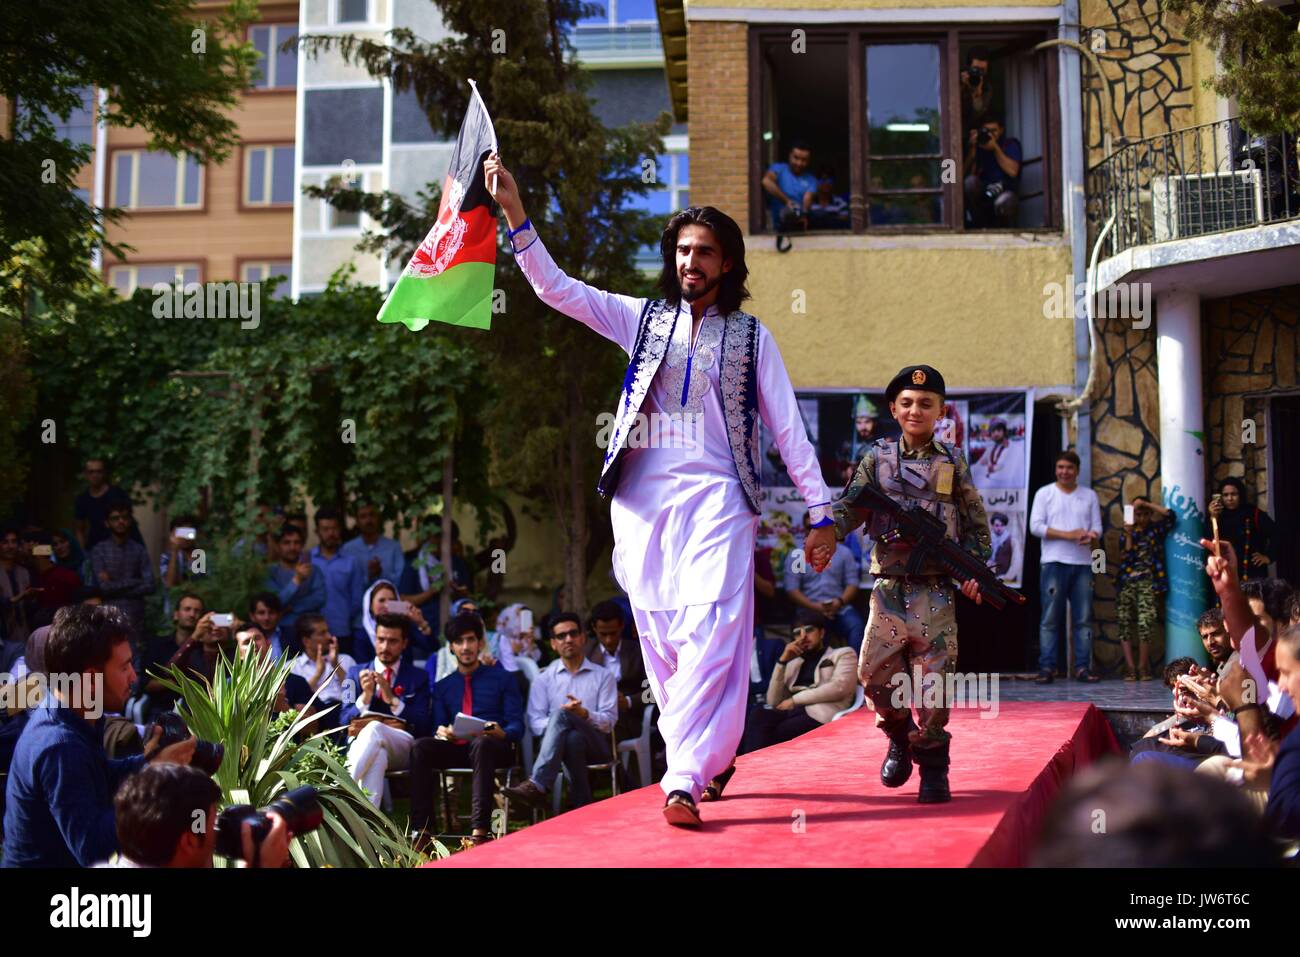 Kabul, Afghanistan. 10th Aug, 2017. Fashion show organizer Ajmal Haqiqi waves a national flag during the show in Kabul, Afghanistan, on Aug. 10, 2017. More than 20 models including six girls attired in colorful dress attended the catwalk ceremony in Kabul on Thursday to display costumes of ethnic people living in Afghanistan. This is the third time that fashion show was held in the conservative society over the past decade, where Taliban-led militancy is continuing. Credit: Dai He/Xinhua/Alamy Live News Stock Photo